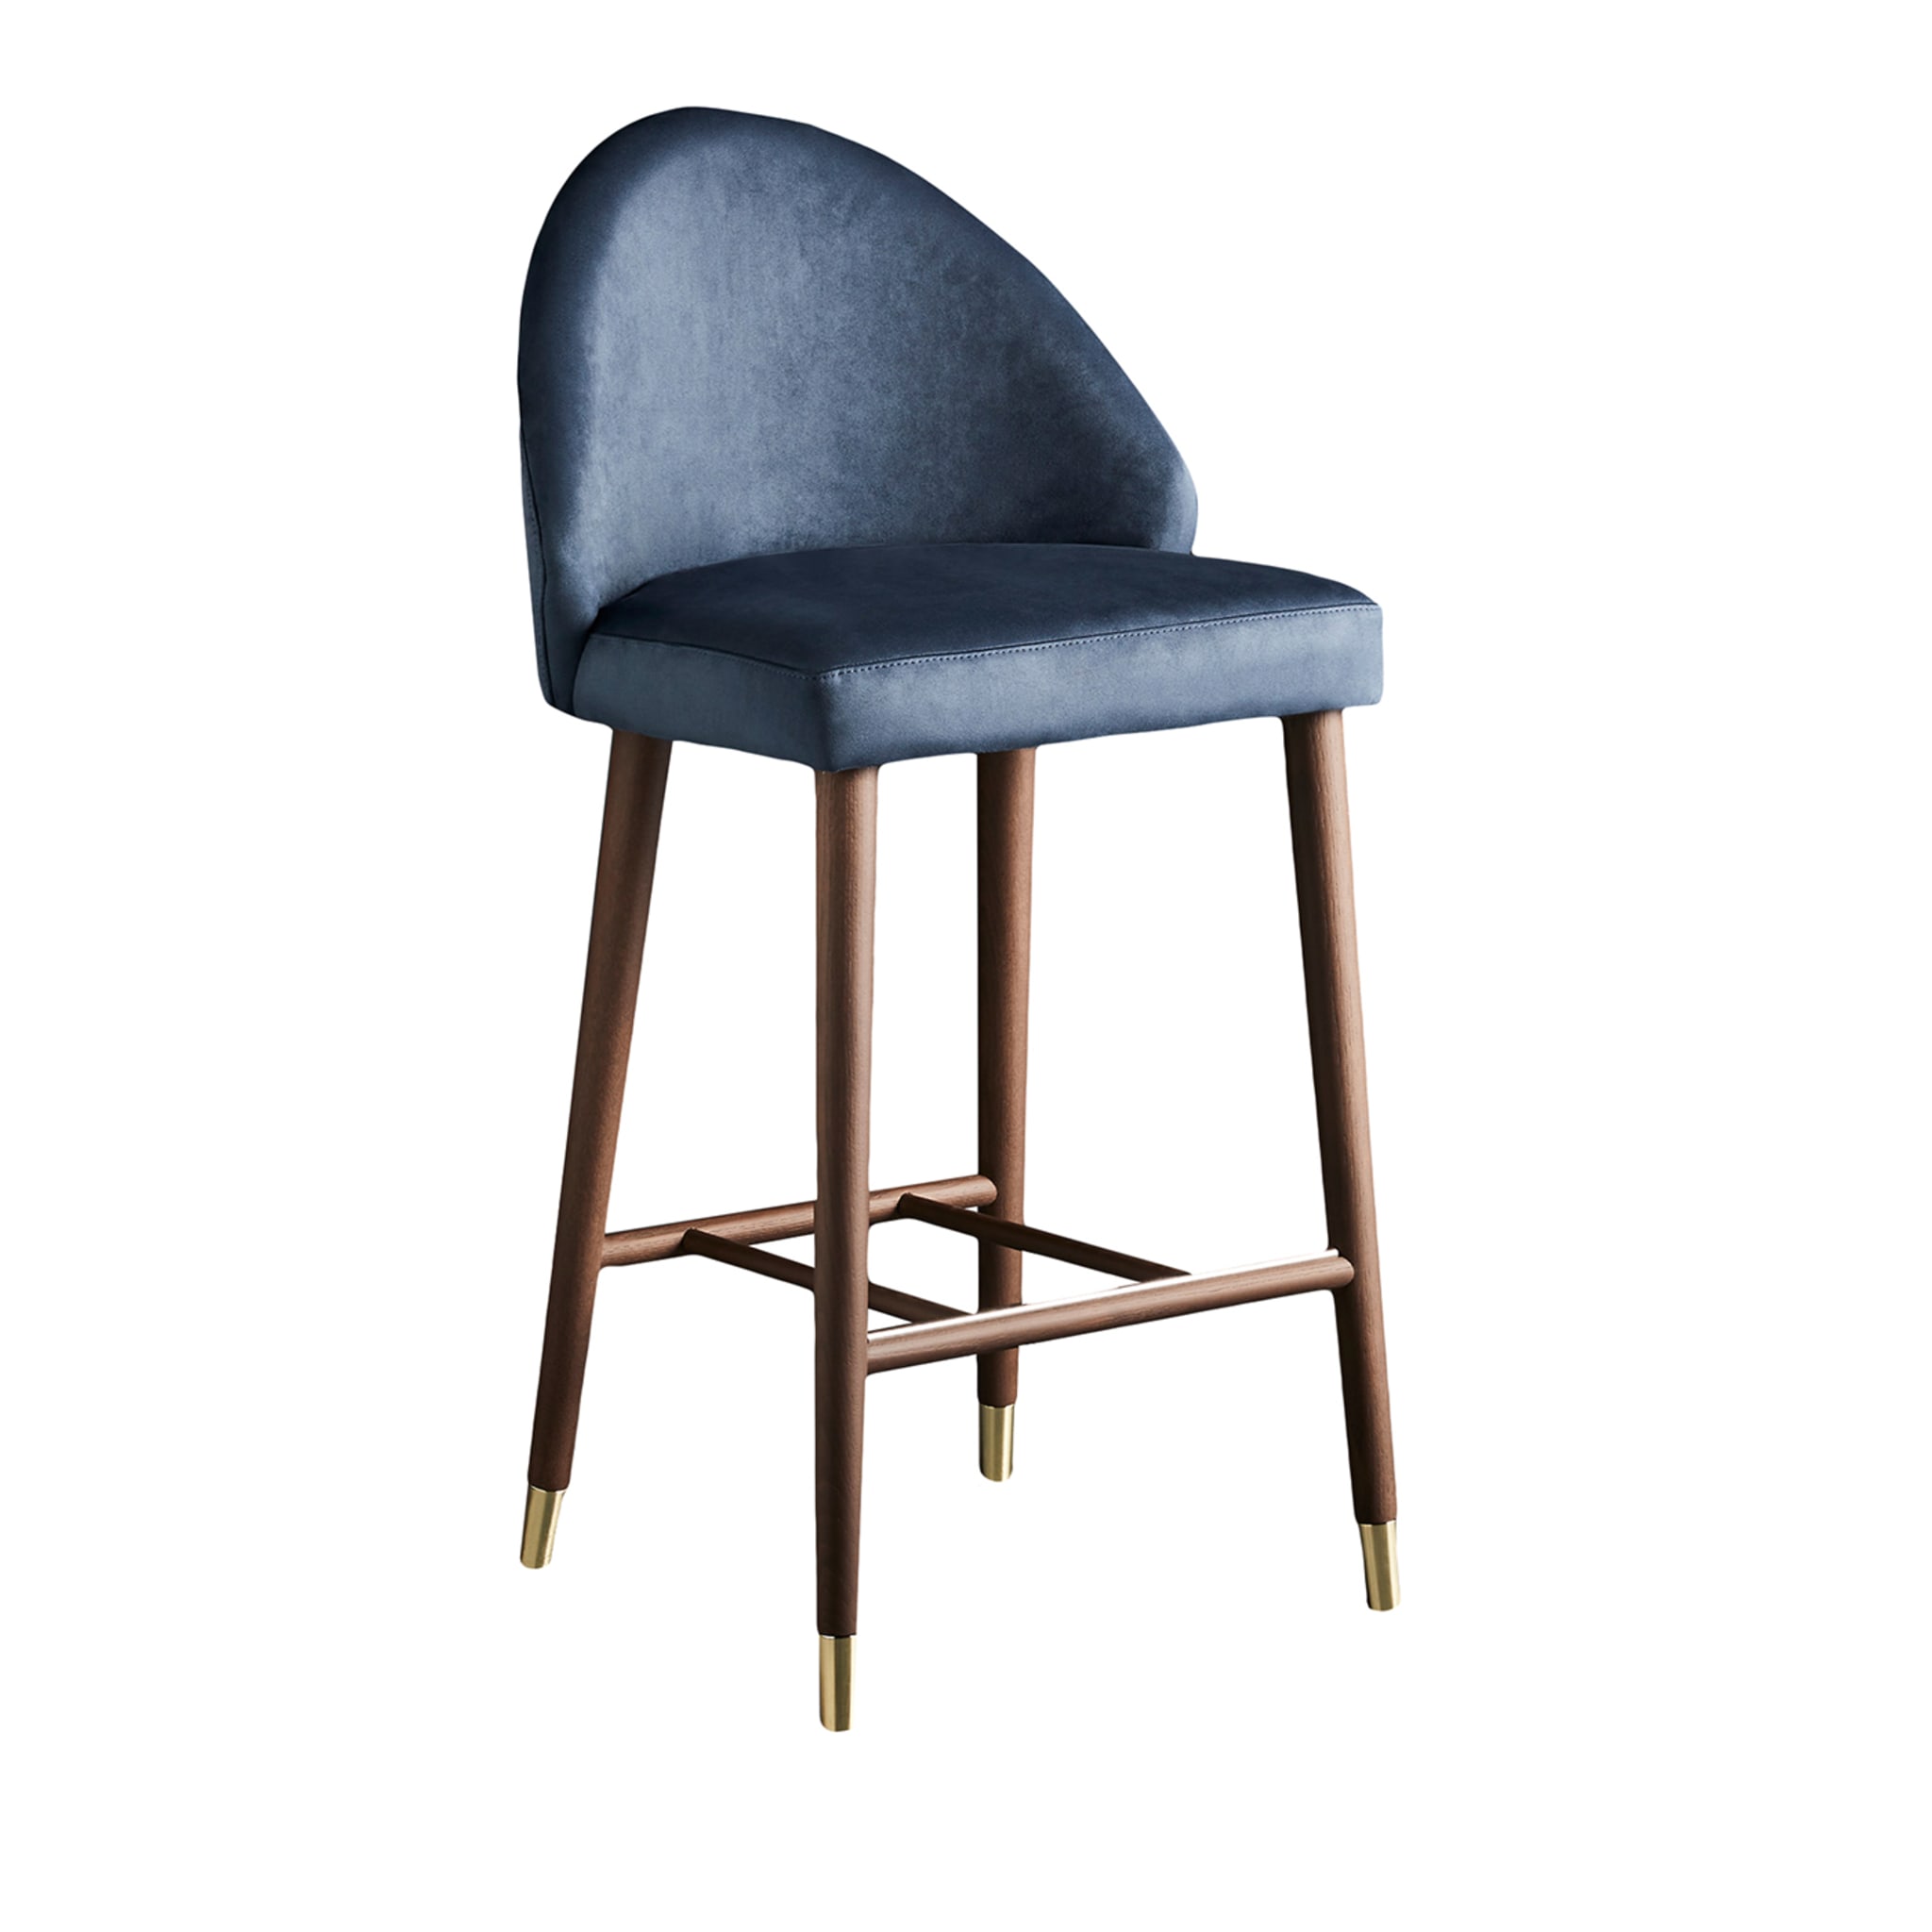 Diana.ss Blue & Brown Stool by W. Colico - Main view